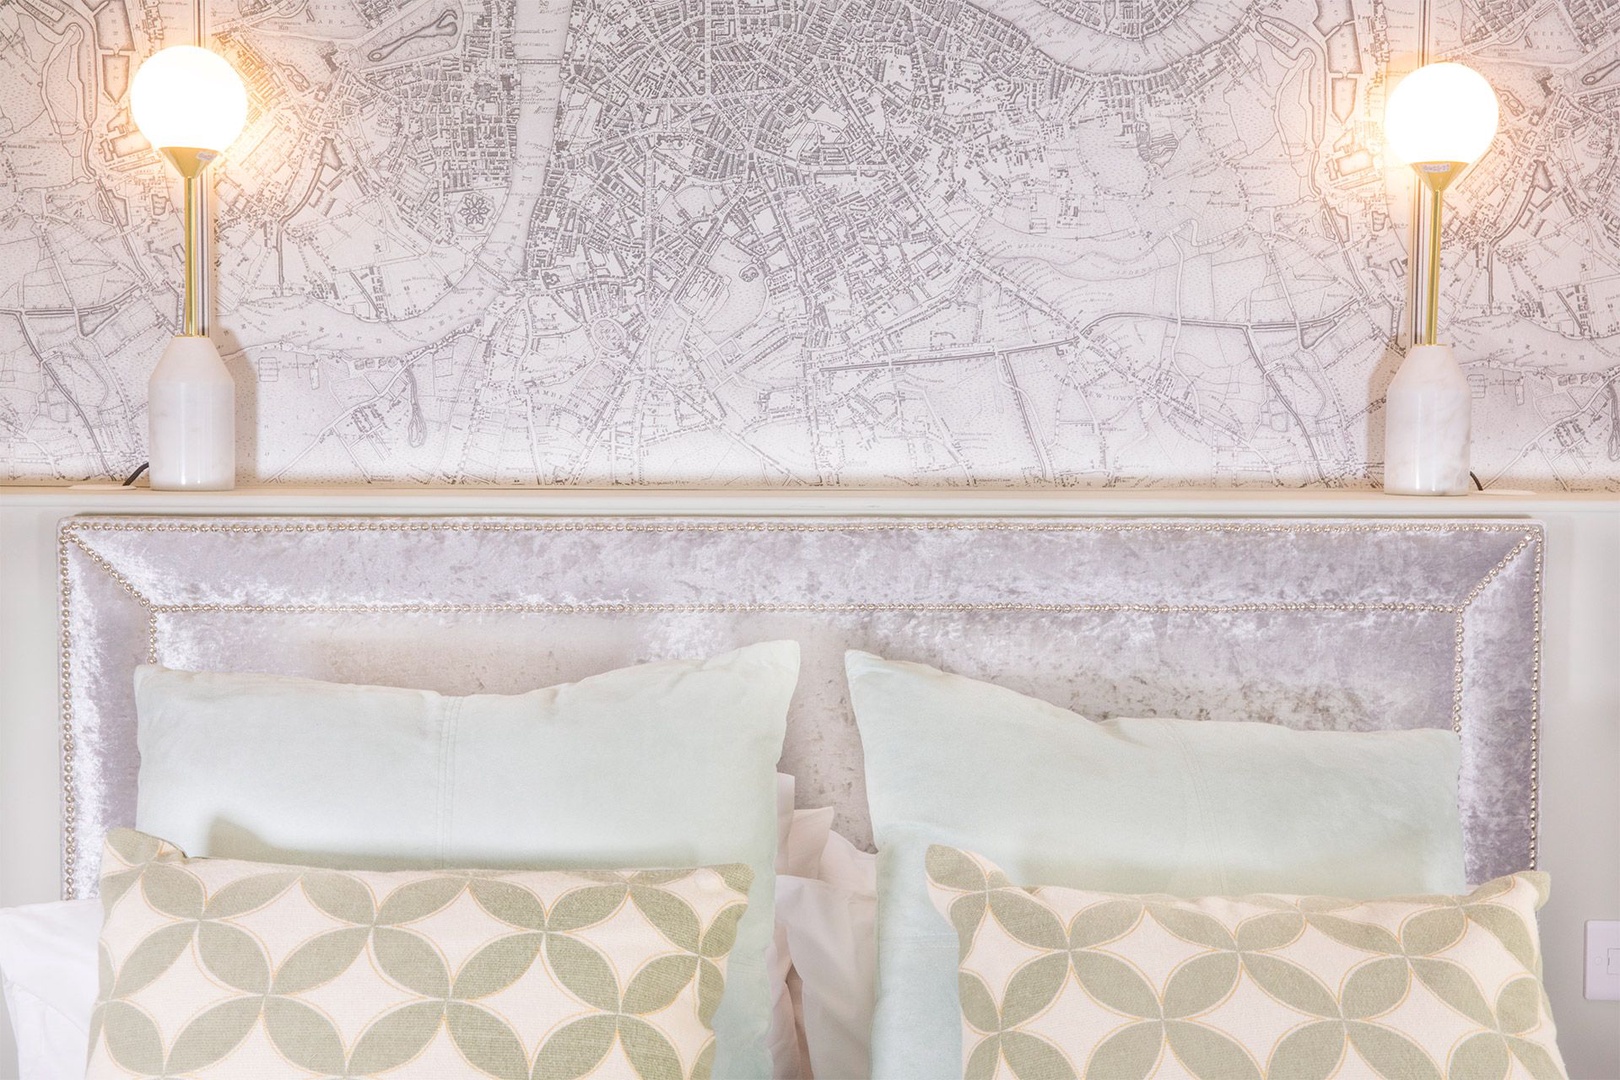 A London map above the bed!